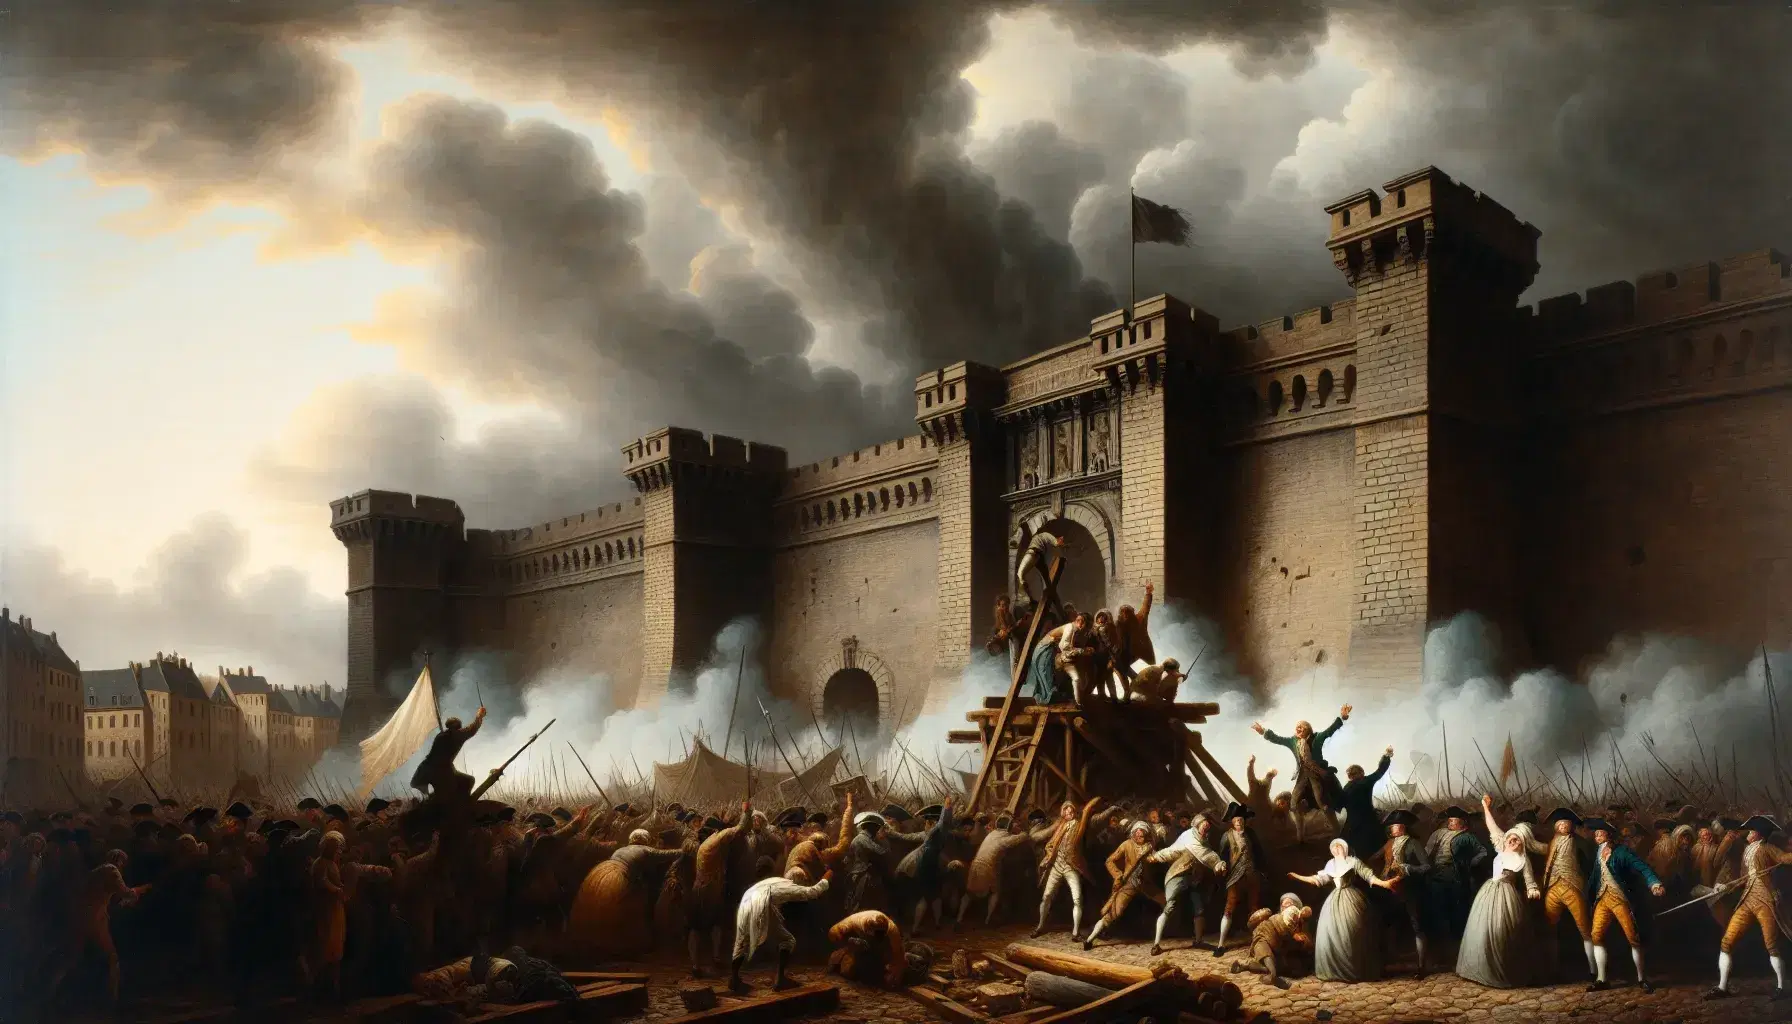 Chaotic scene in front of a stone fortress with high walls and a large gate, overcast skies and a riotous 18th century crowd with improvised weapons.